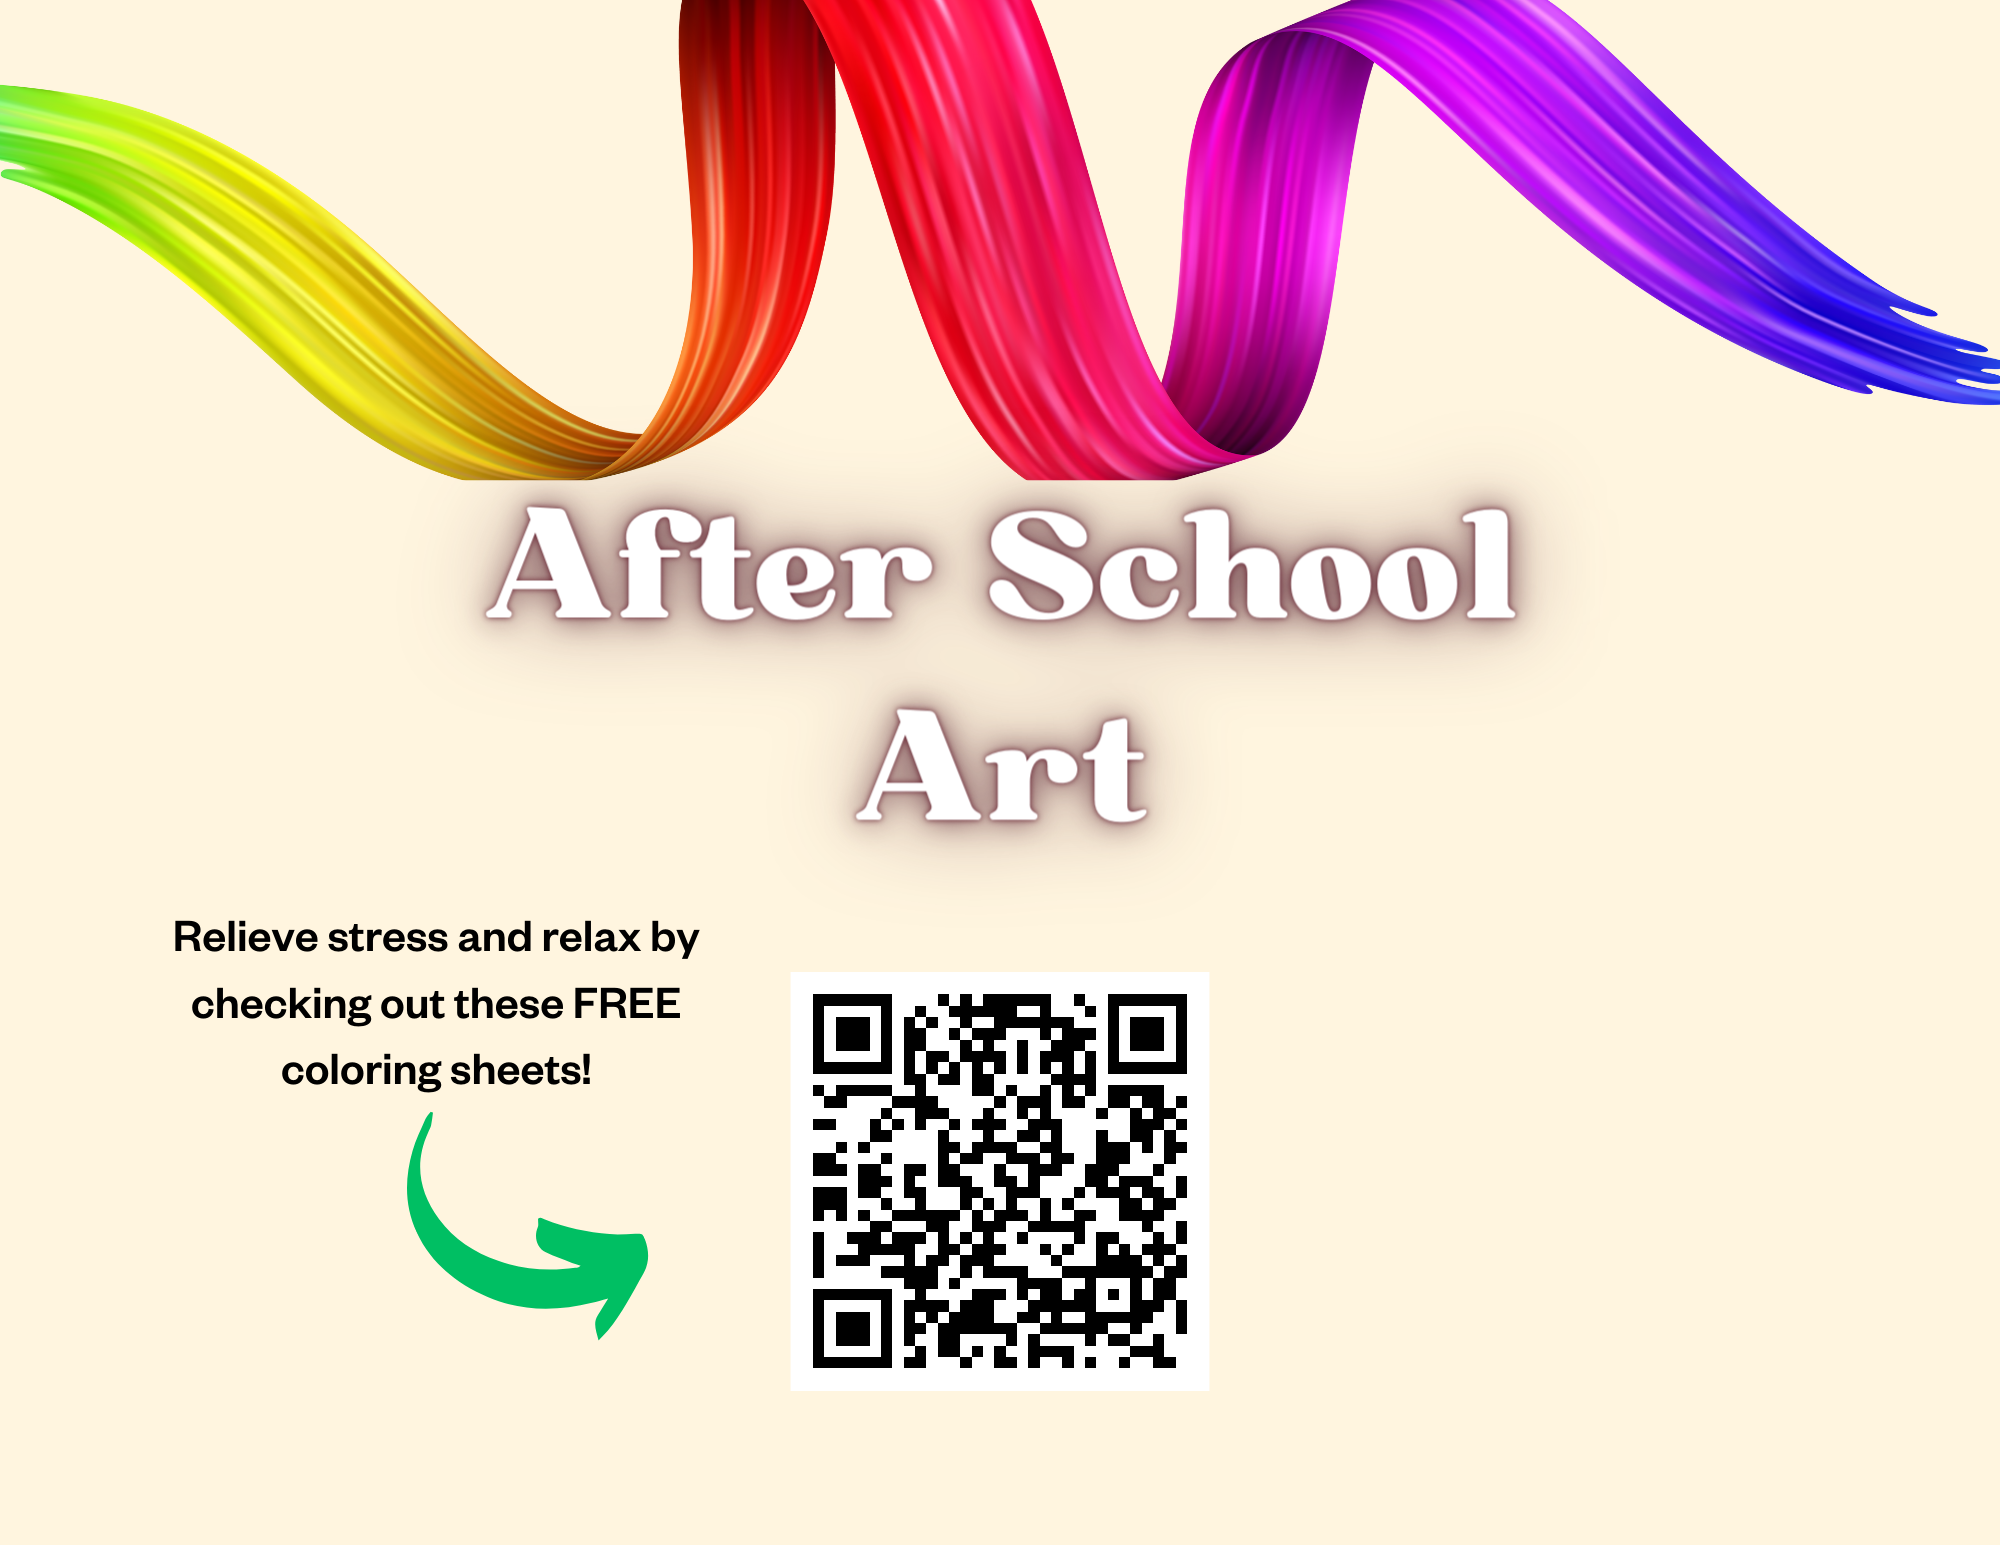 After School Art with QR code to free coloring sheets